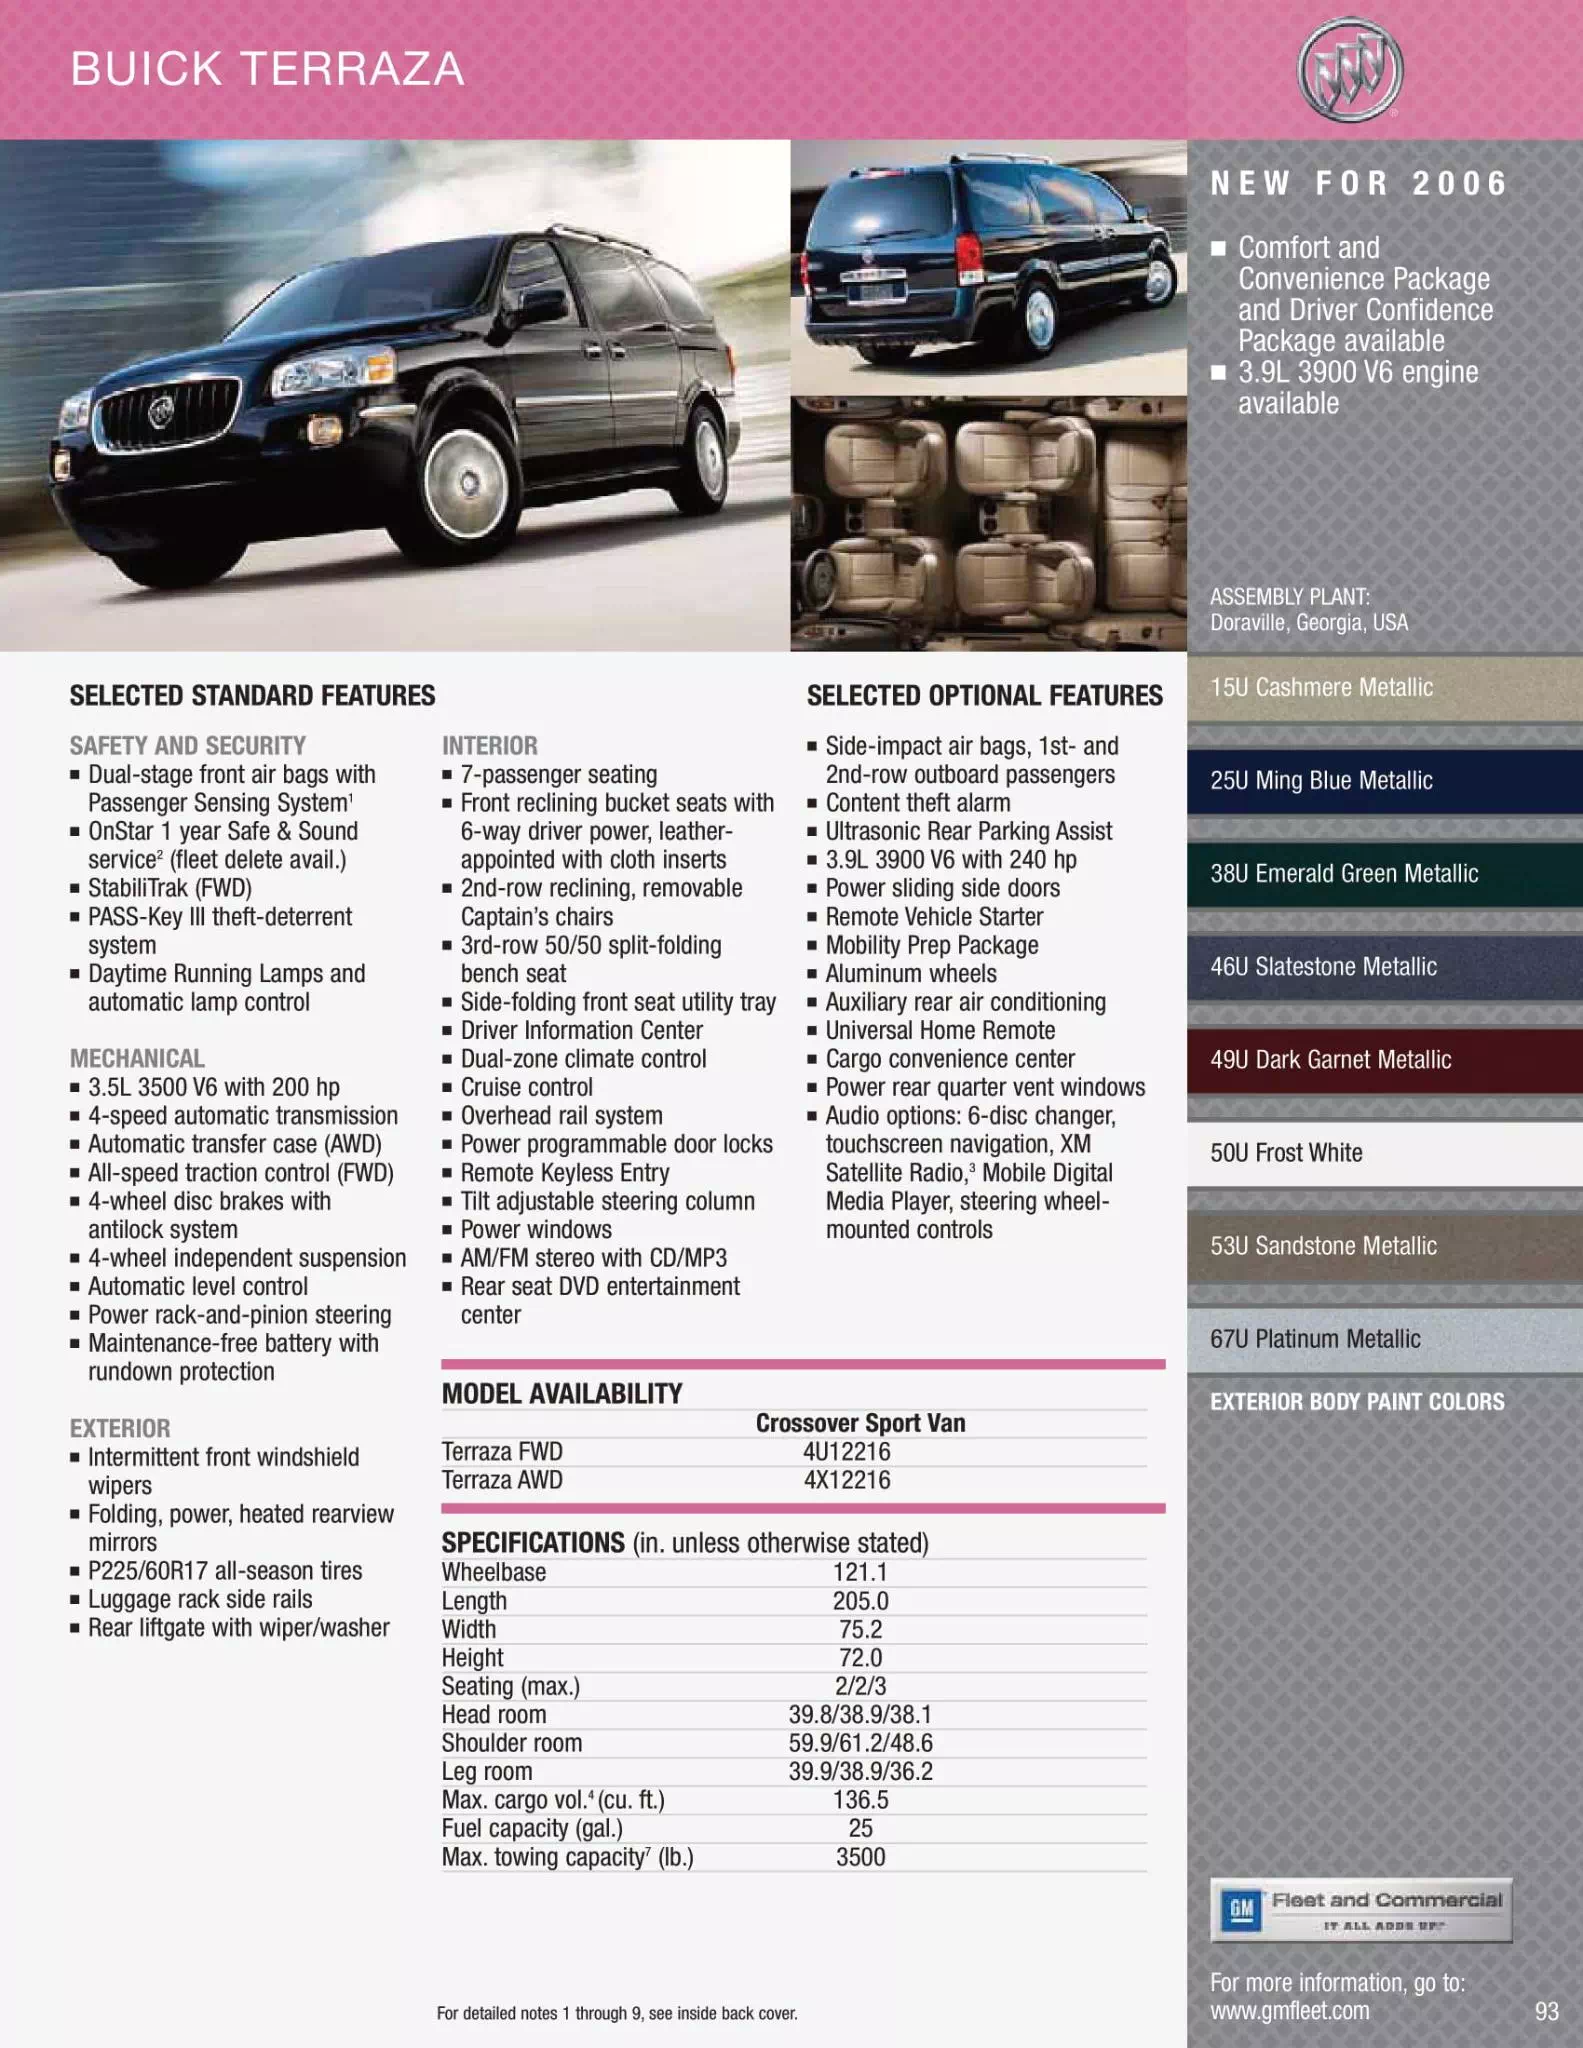 Paint Colors and Codes used on Buick GM vehicles in 2006